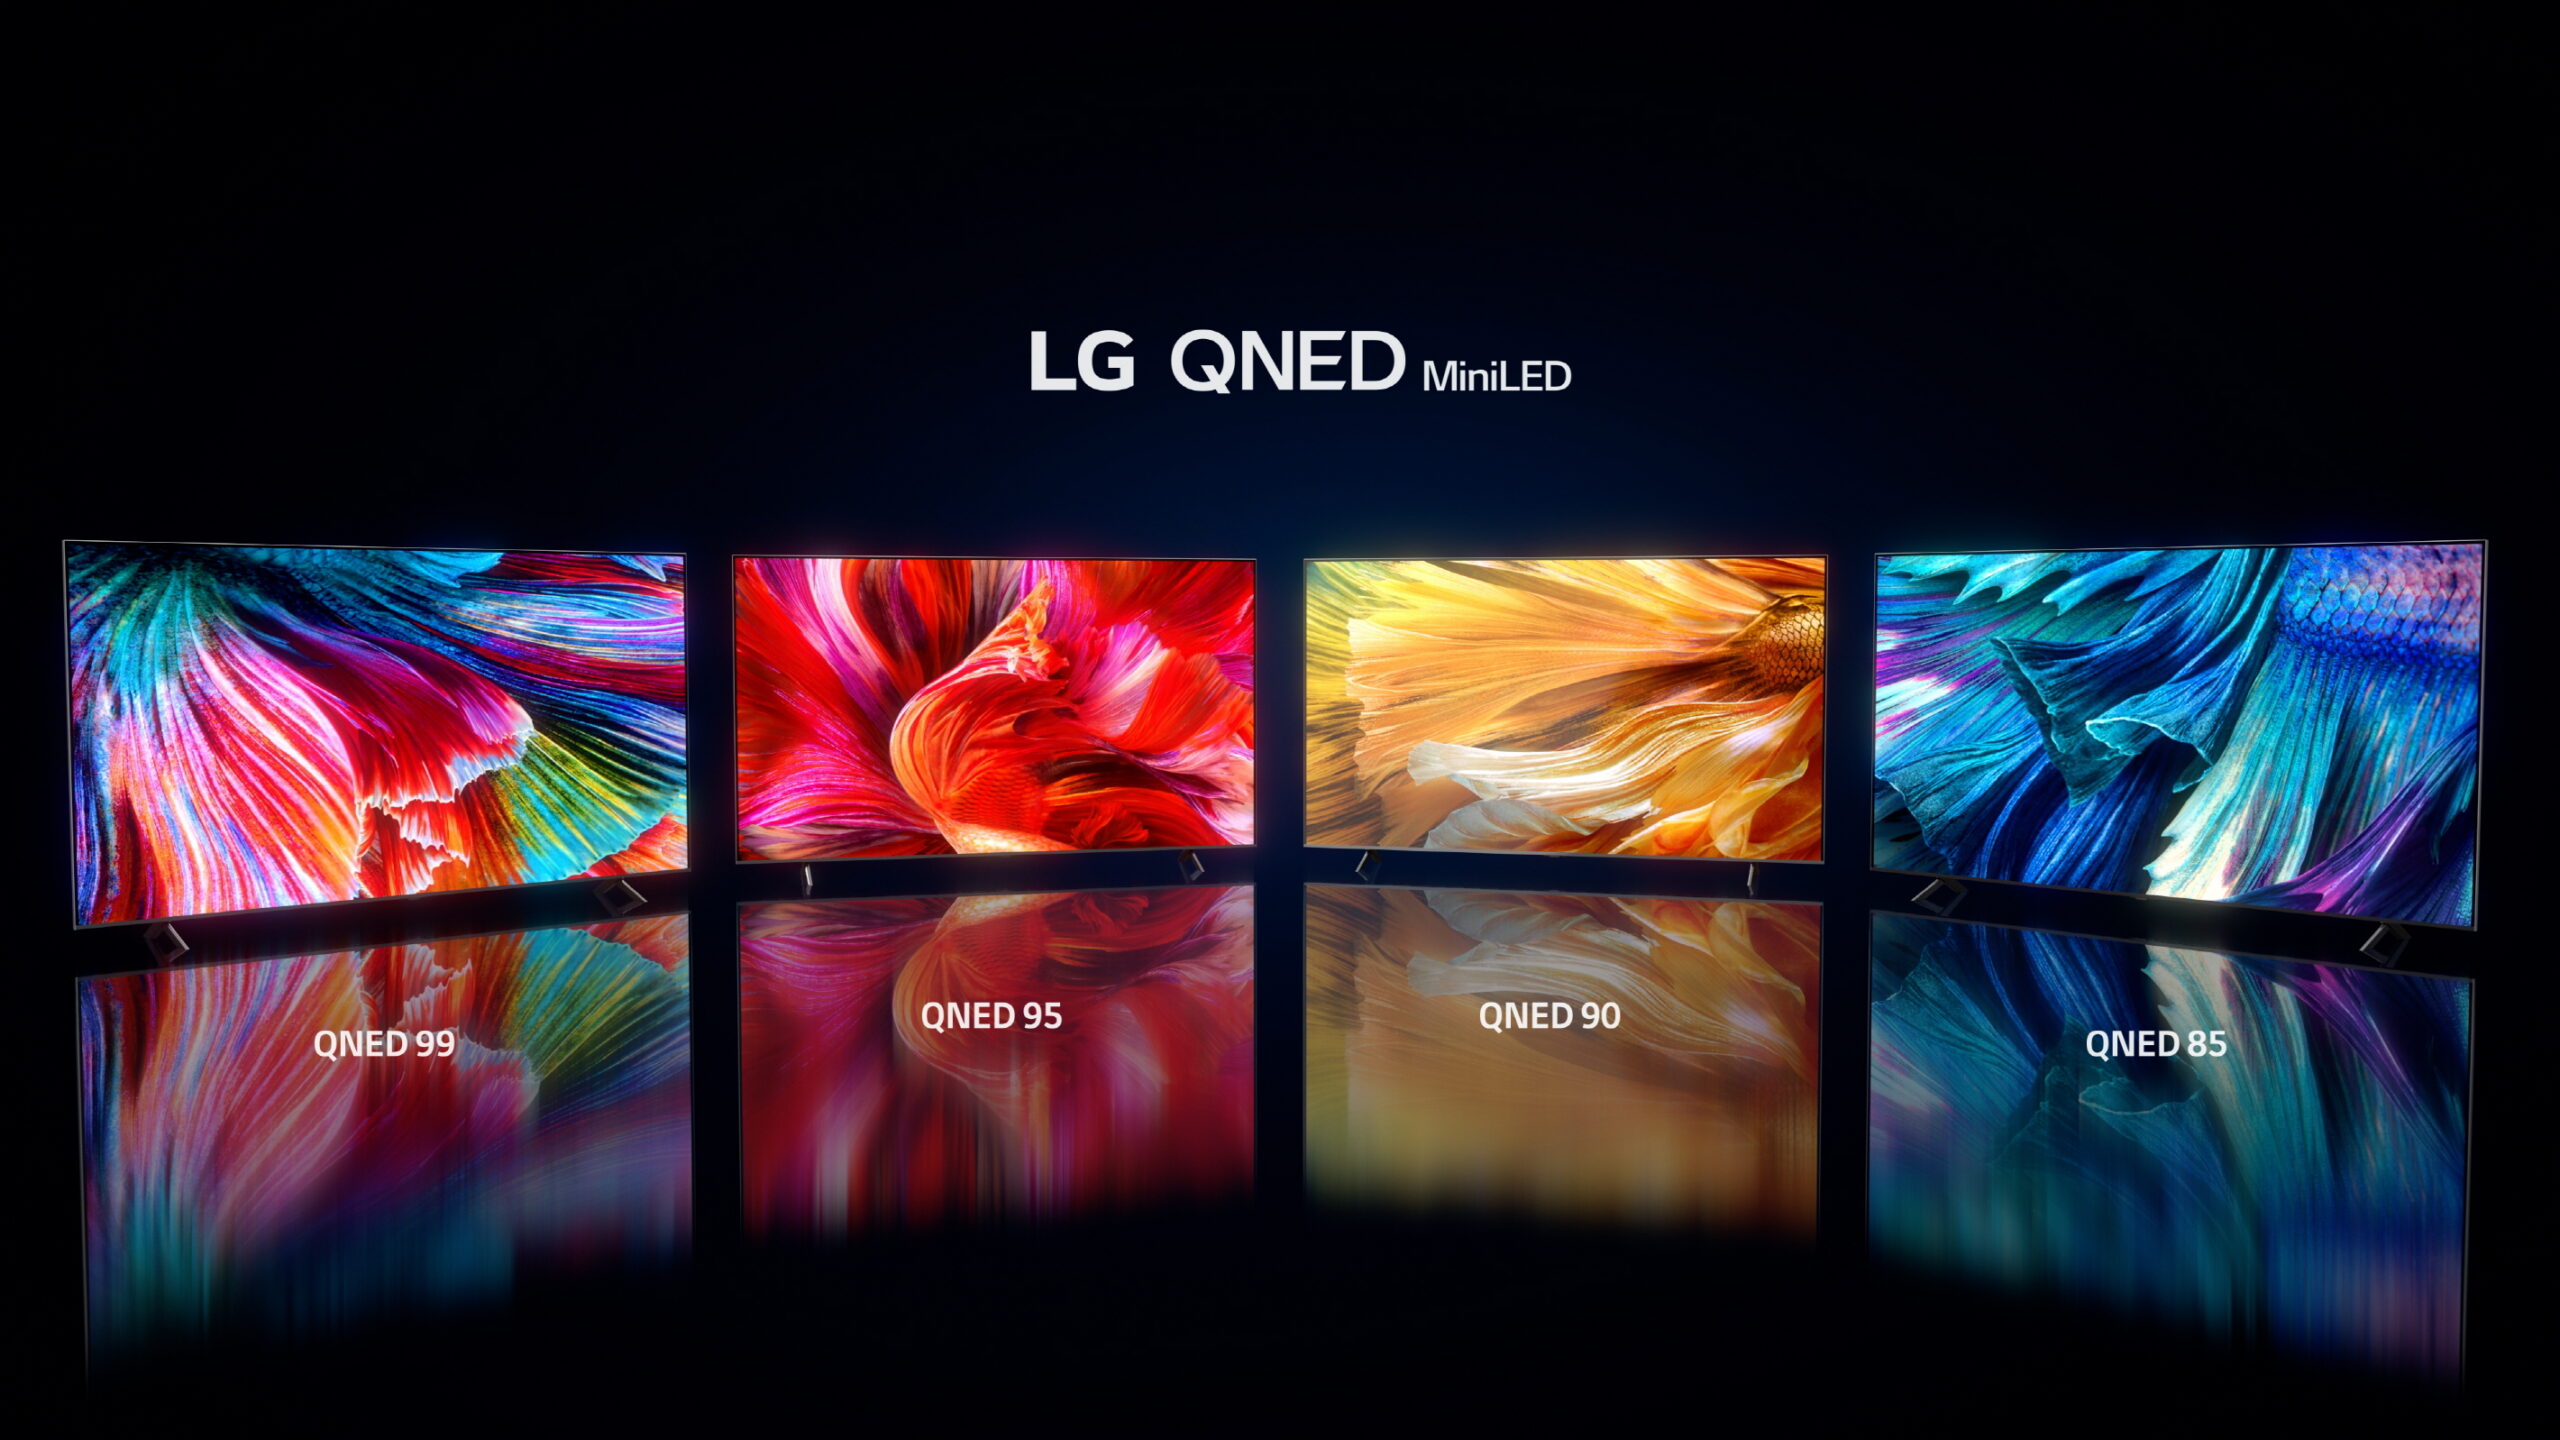 LG 2021 TV Range Revealed Mix Of OLED, QNED, MiniLED & Nano Cell, The Question Is How Do You